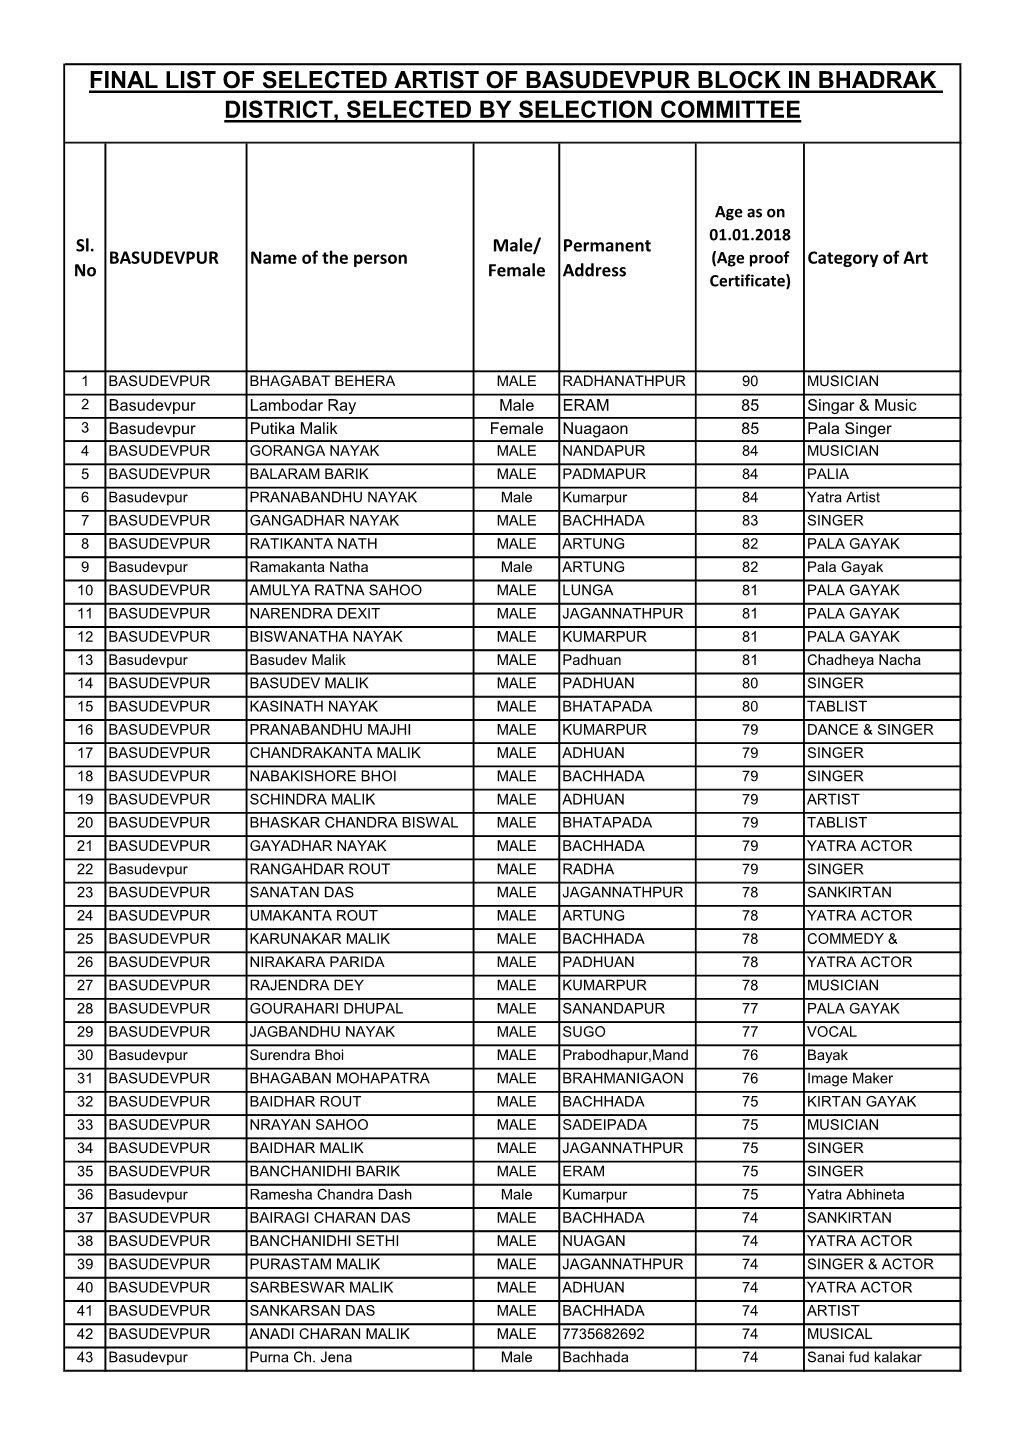 Final List of Selected Artist of Basudevpur Block in Bhadrak District, Selected by Selection Committee